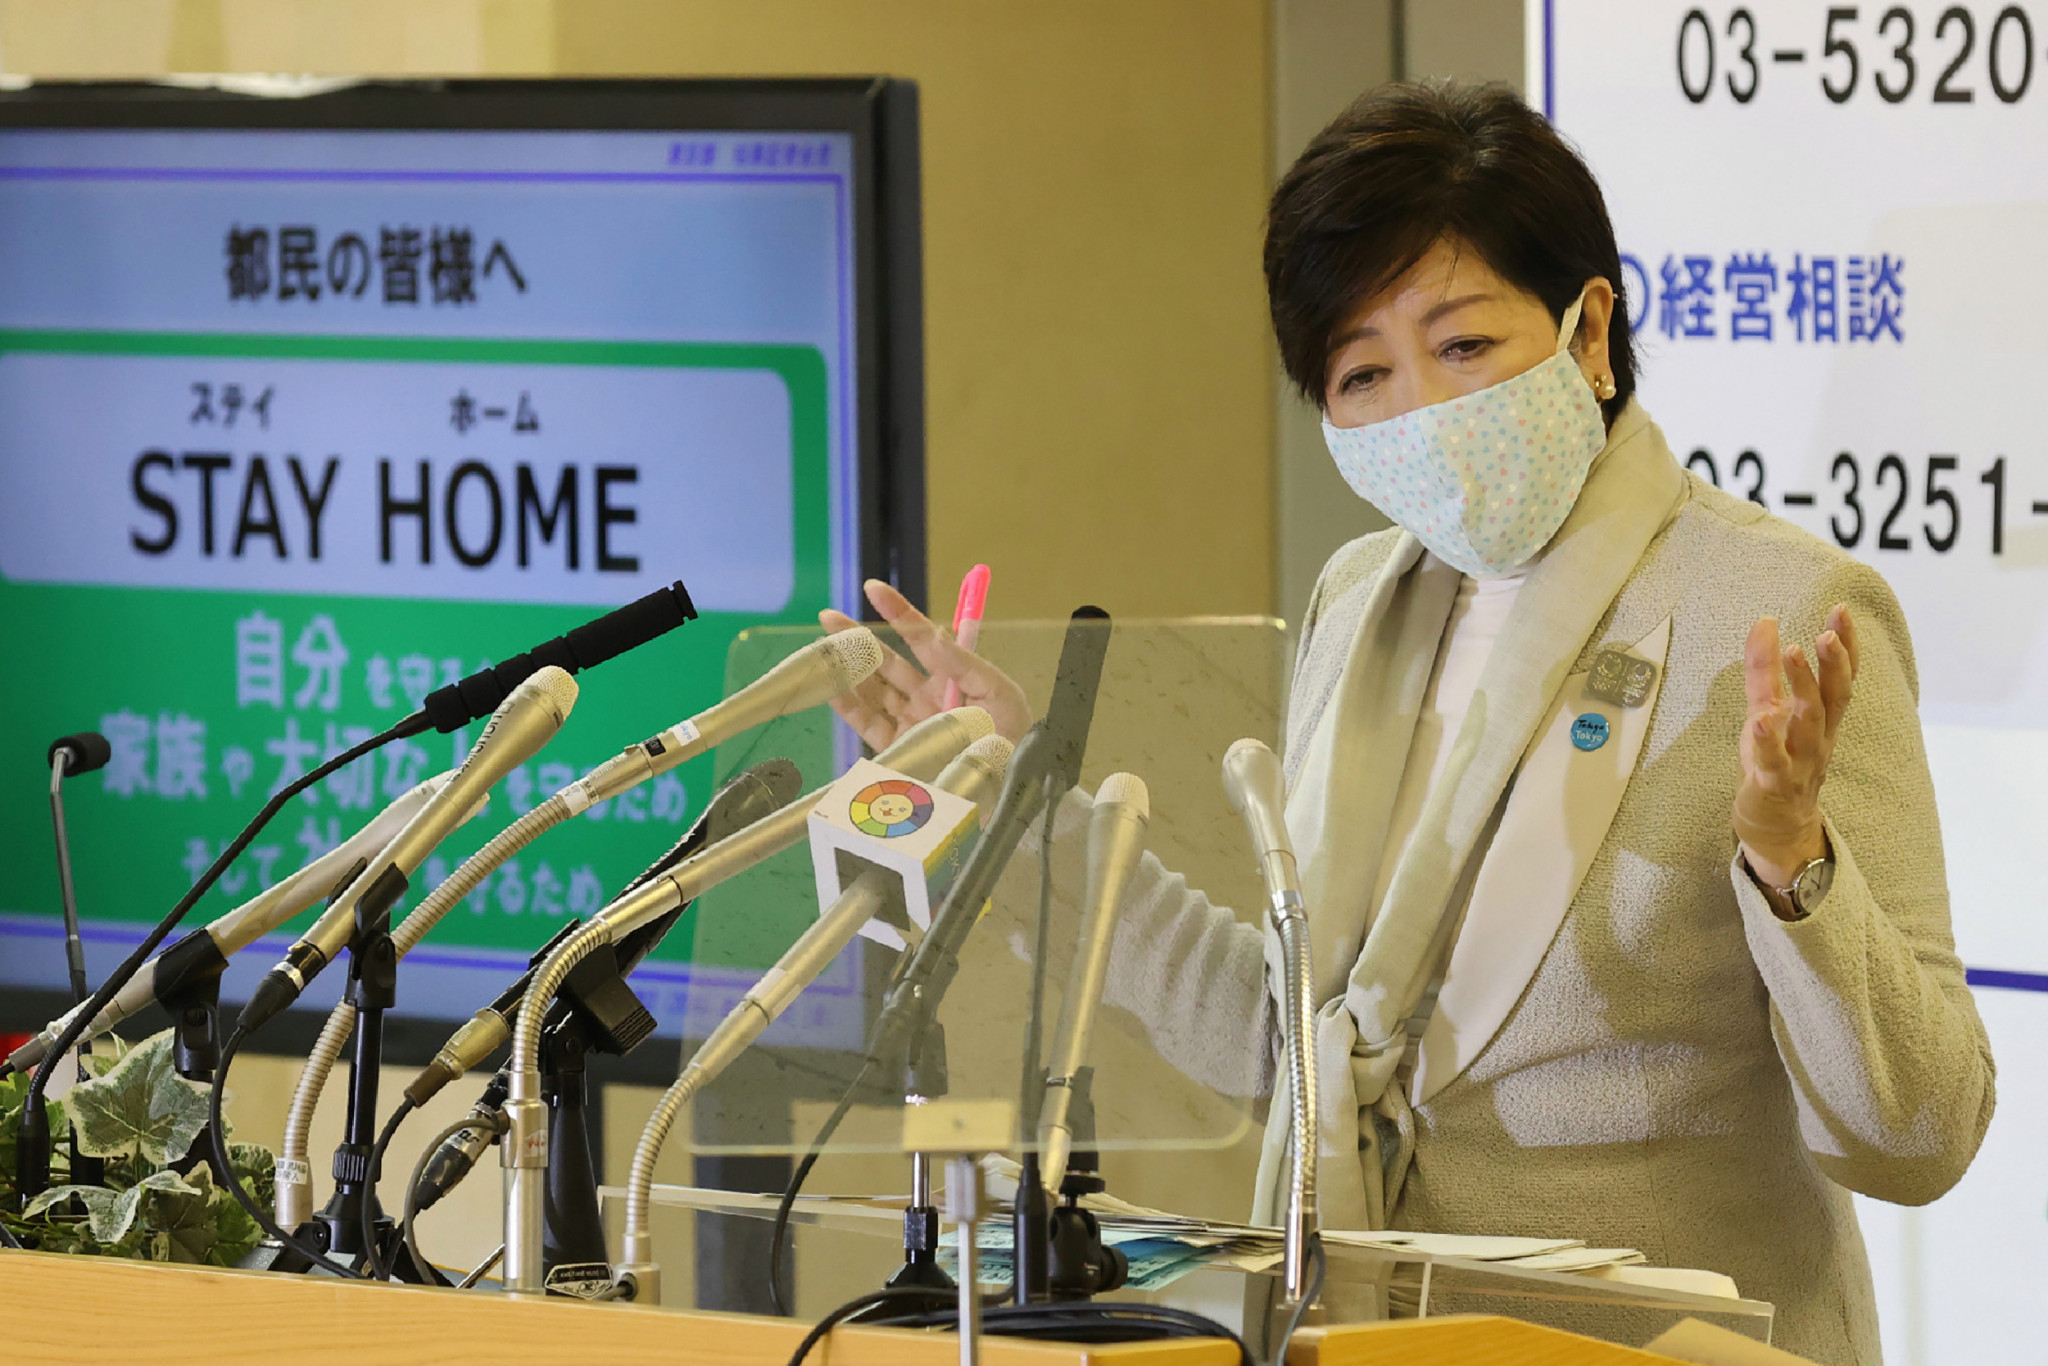 Tokyo Governor Yuriko Koike introduced emergency measures to try and contain the spread of coronavirus ©Getty Images